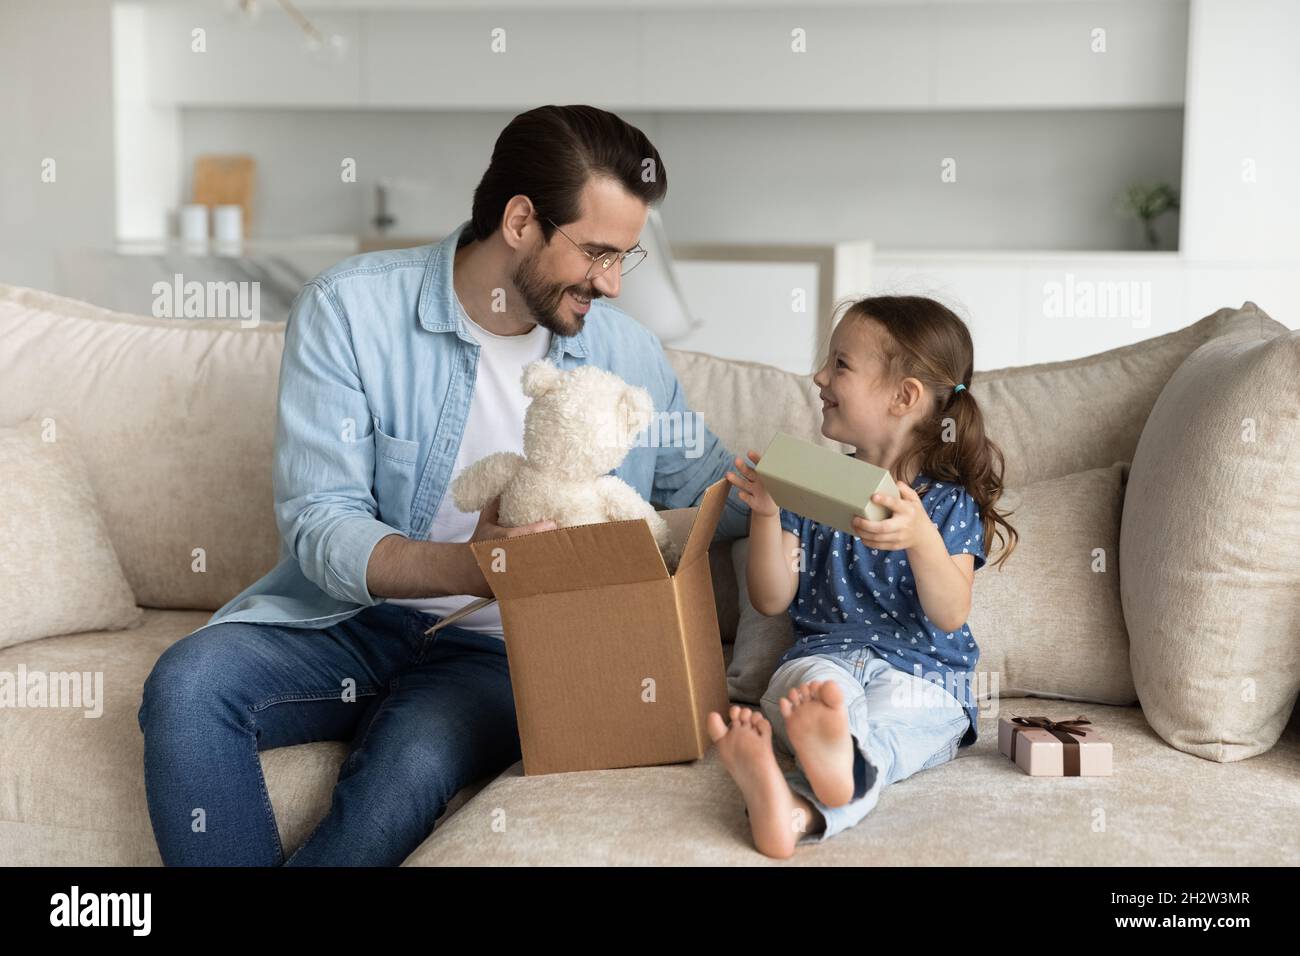 Happy young father unboxing parcel with gifts for small daughter. Stock Photo